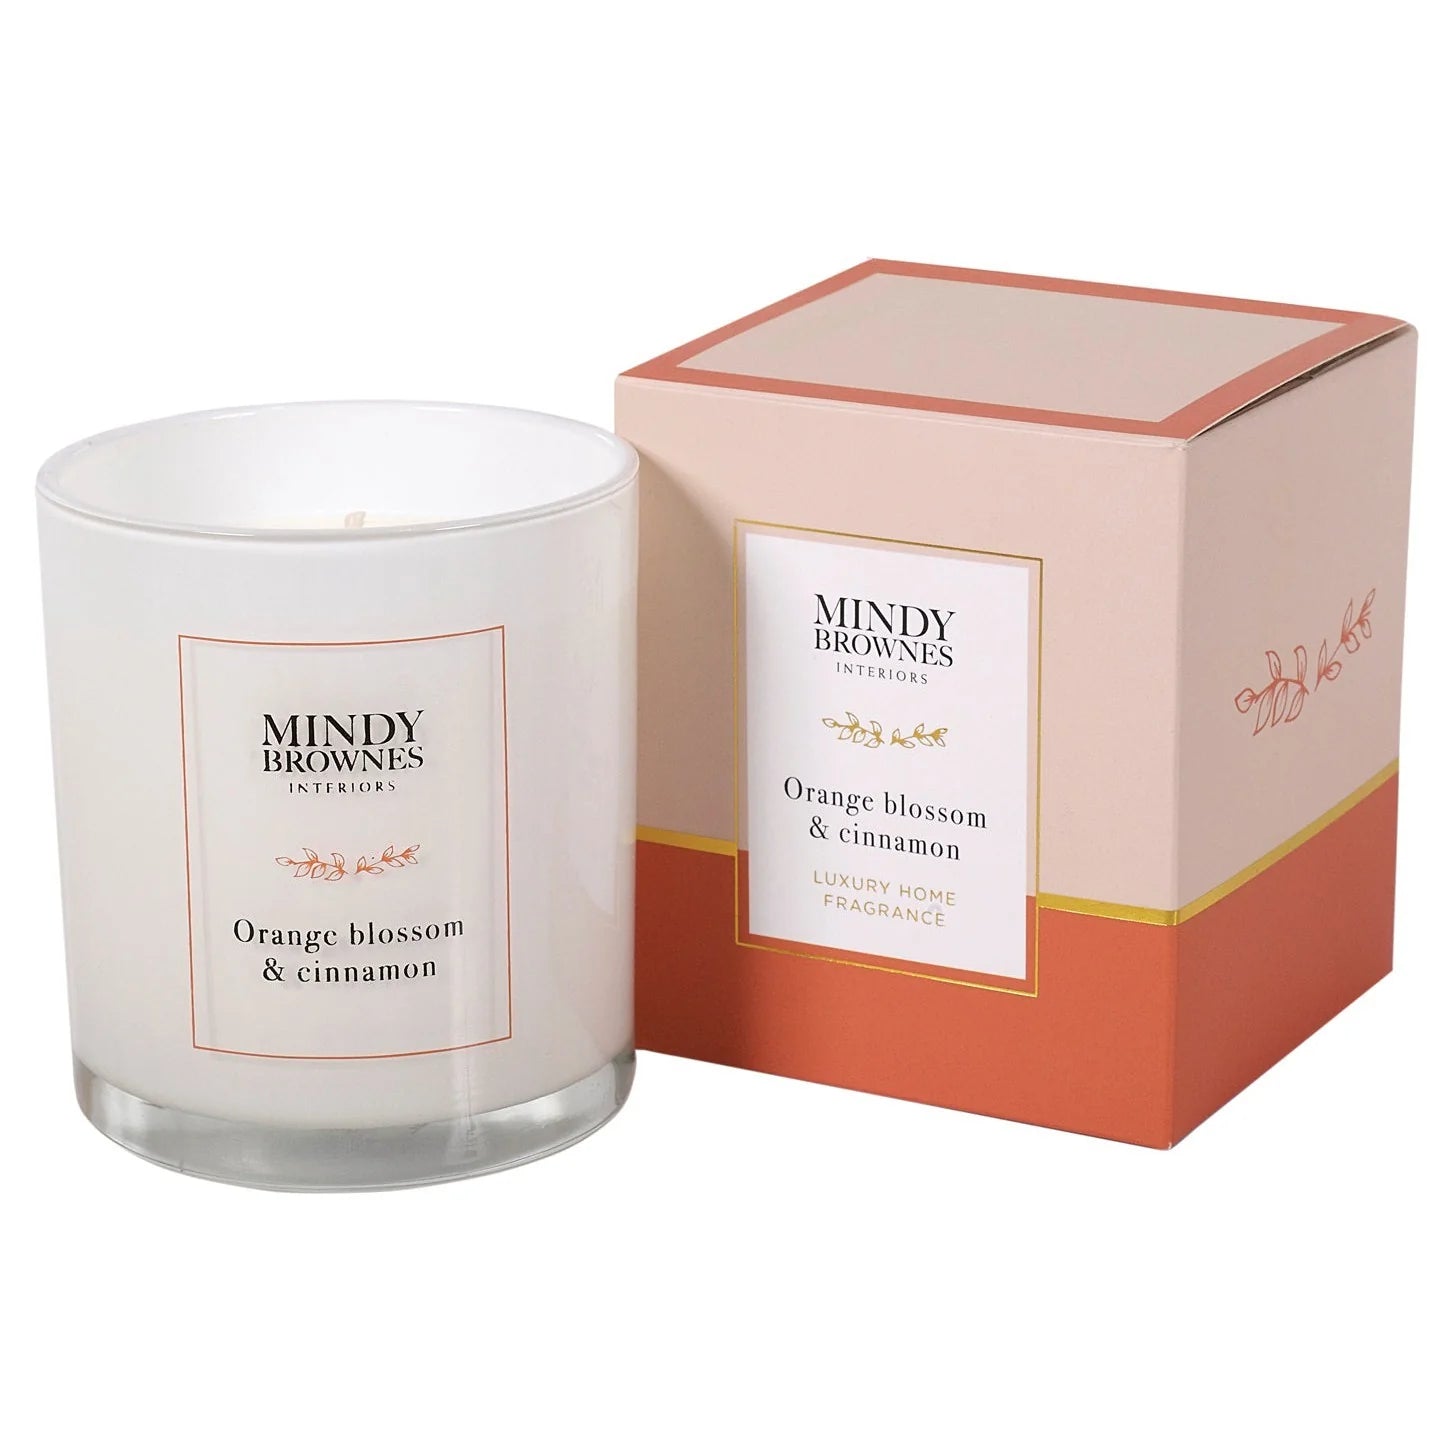 Mindy Brownes Scented Candles - Orange Blossom & Cinnamon